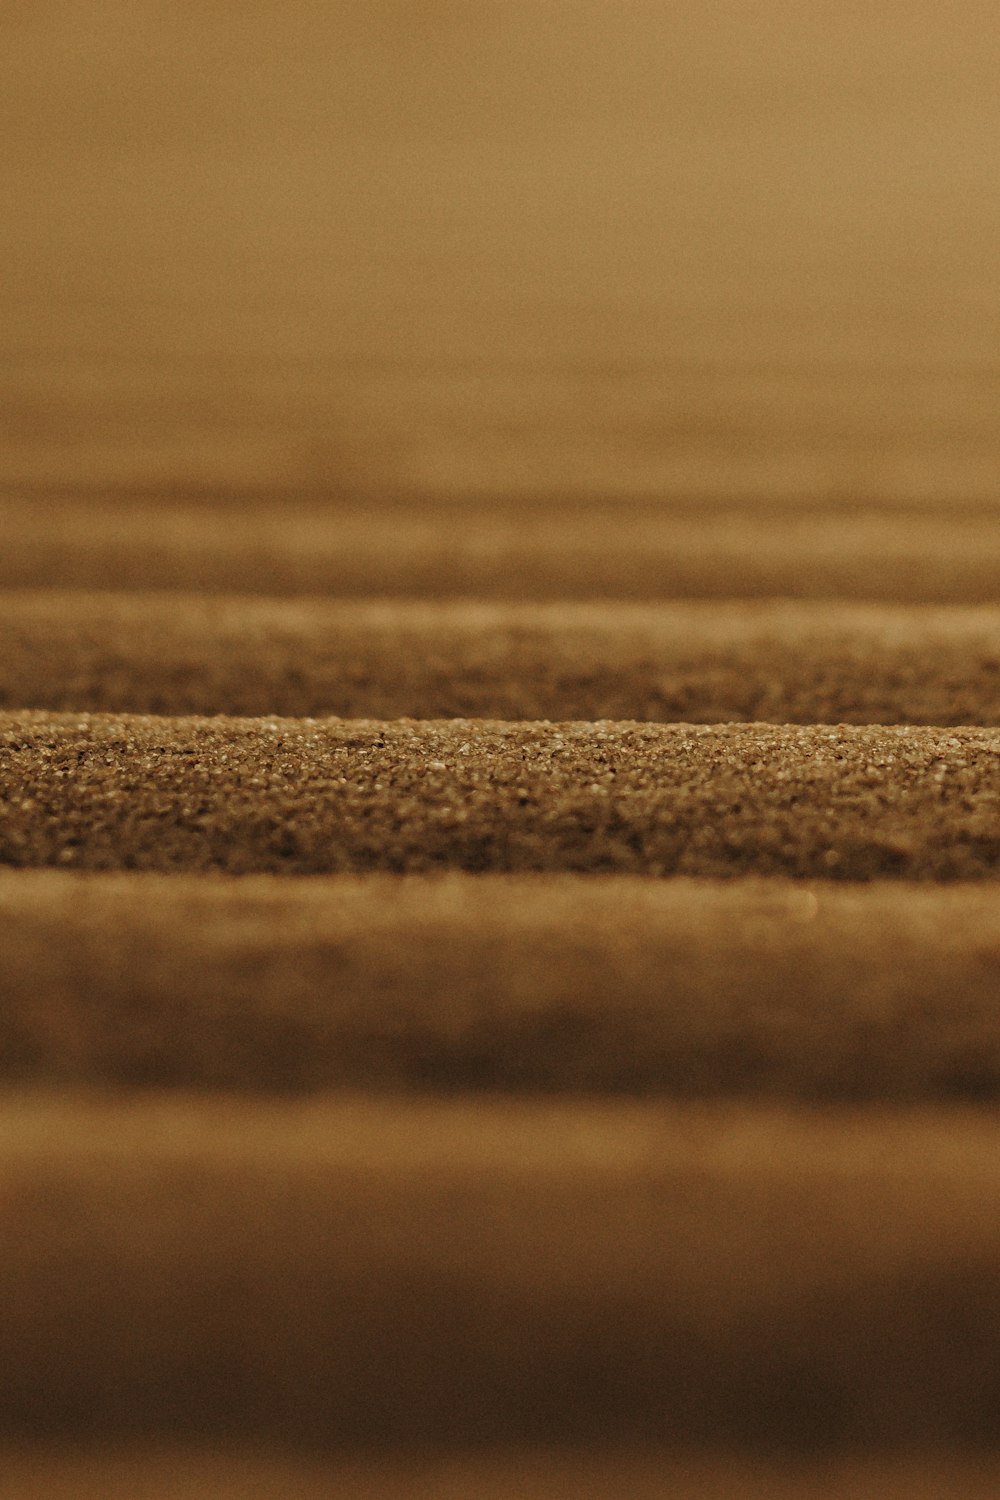 a close up of a wooden surface with a blurry background